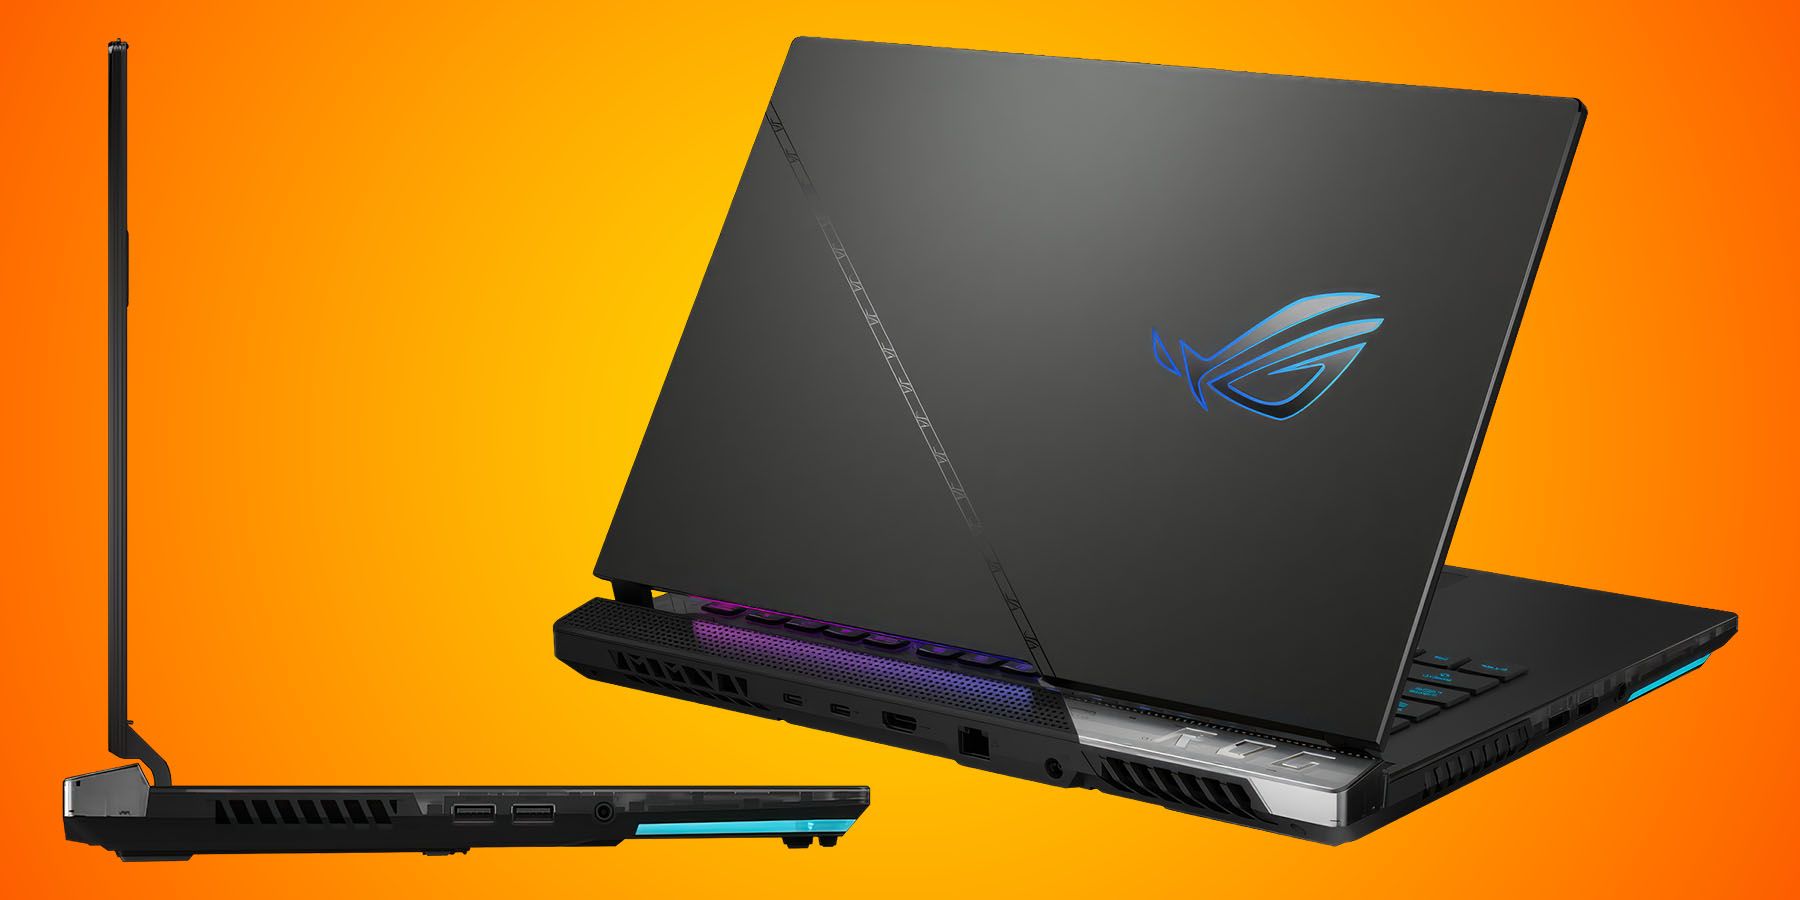 The best deals on gaming laptops